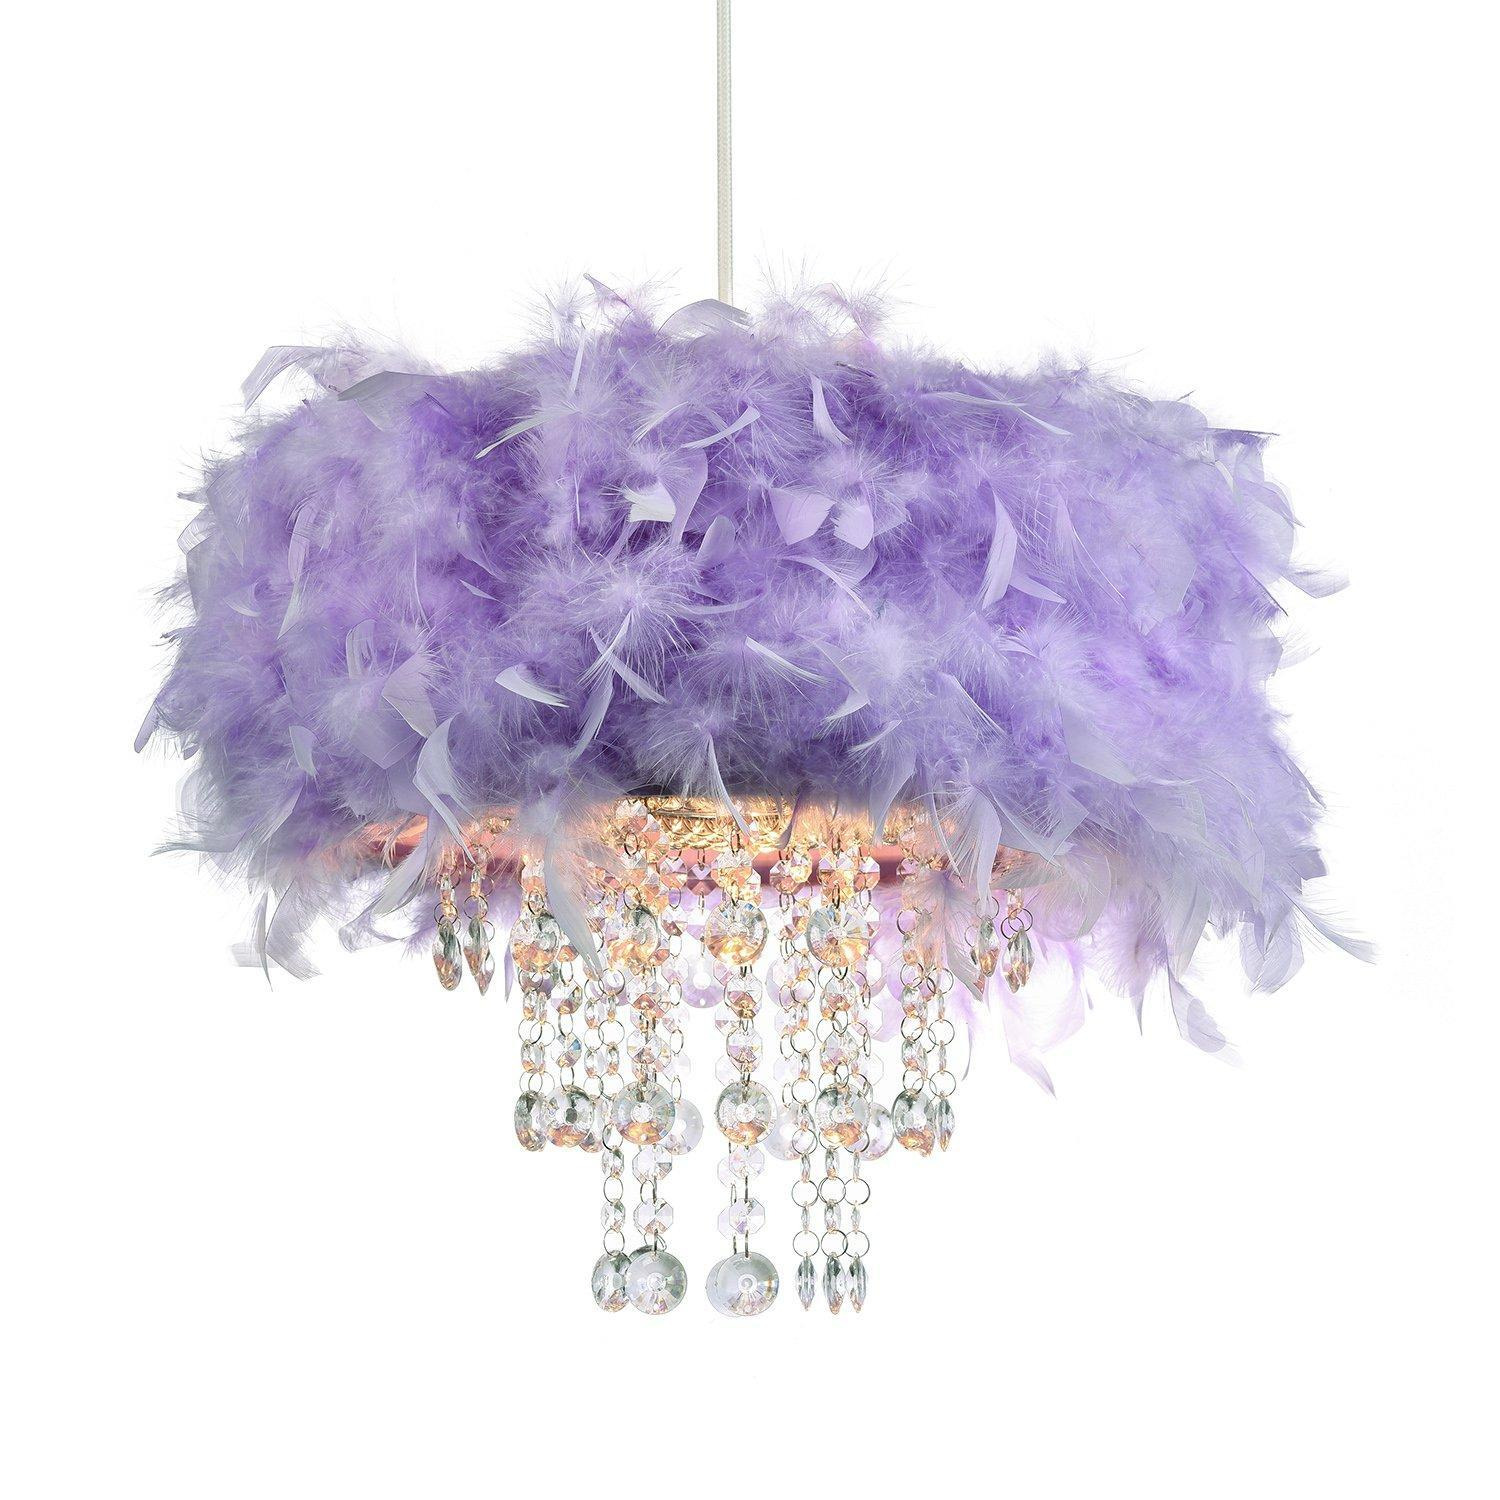 Contemporary Feather Pendant Light Shade with Transparent Acrylic Droplets - image 1